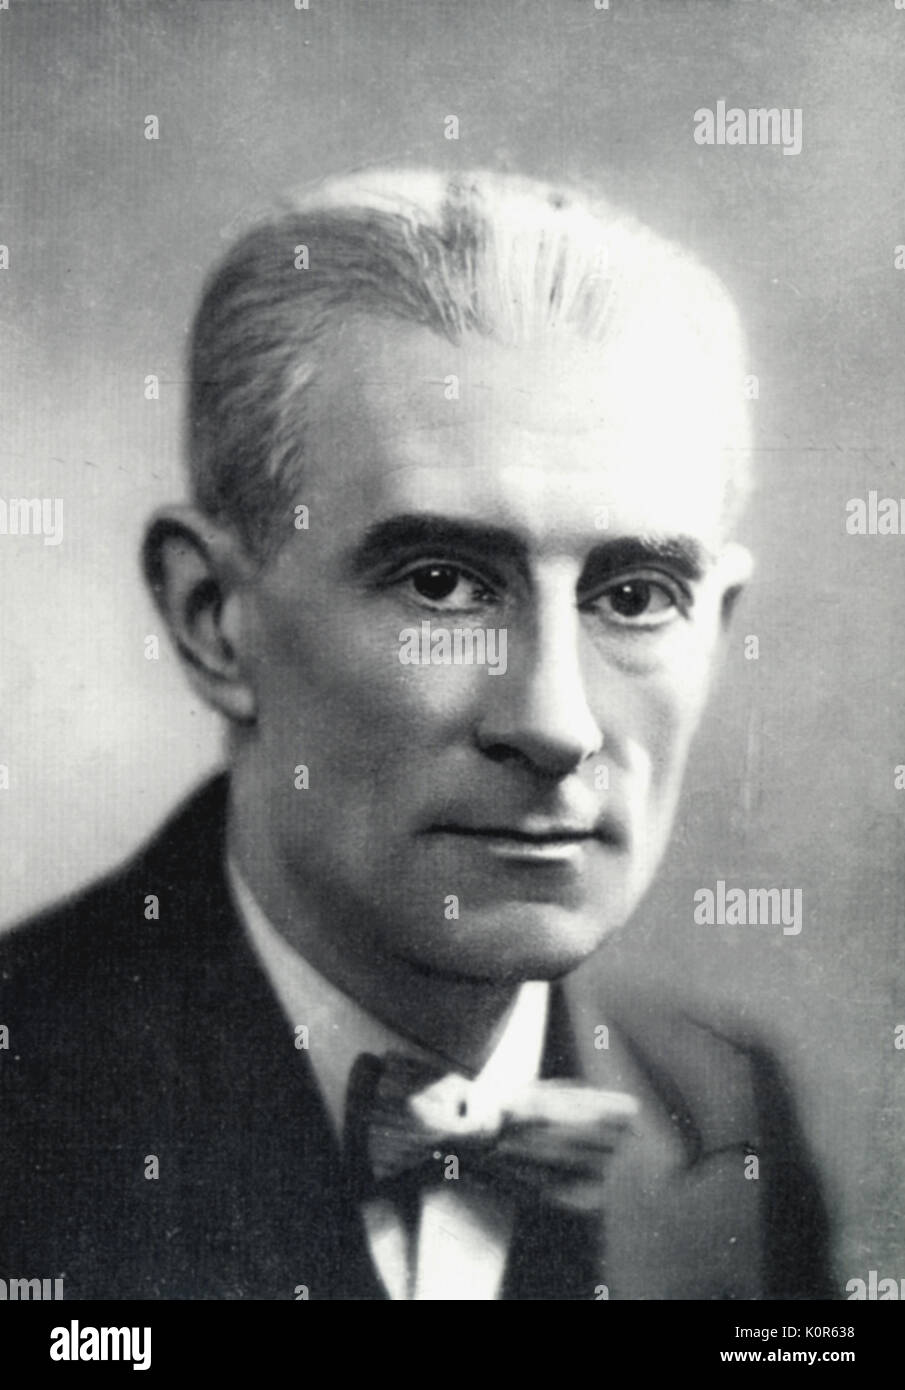 RAVEL, Maurice - Portrait French composer (1875-1937). Stock Photo